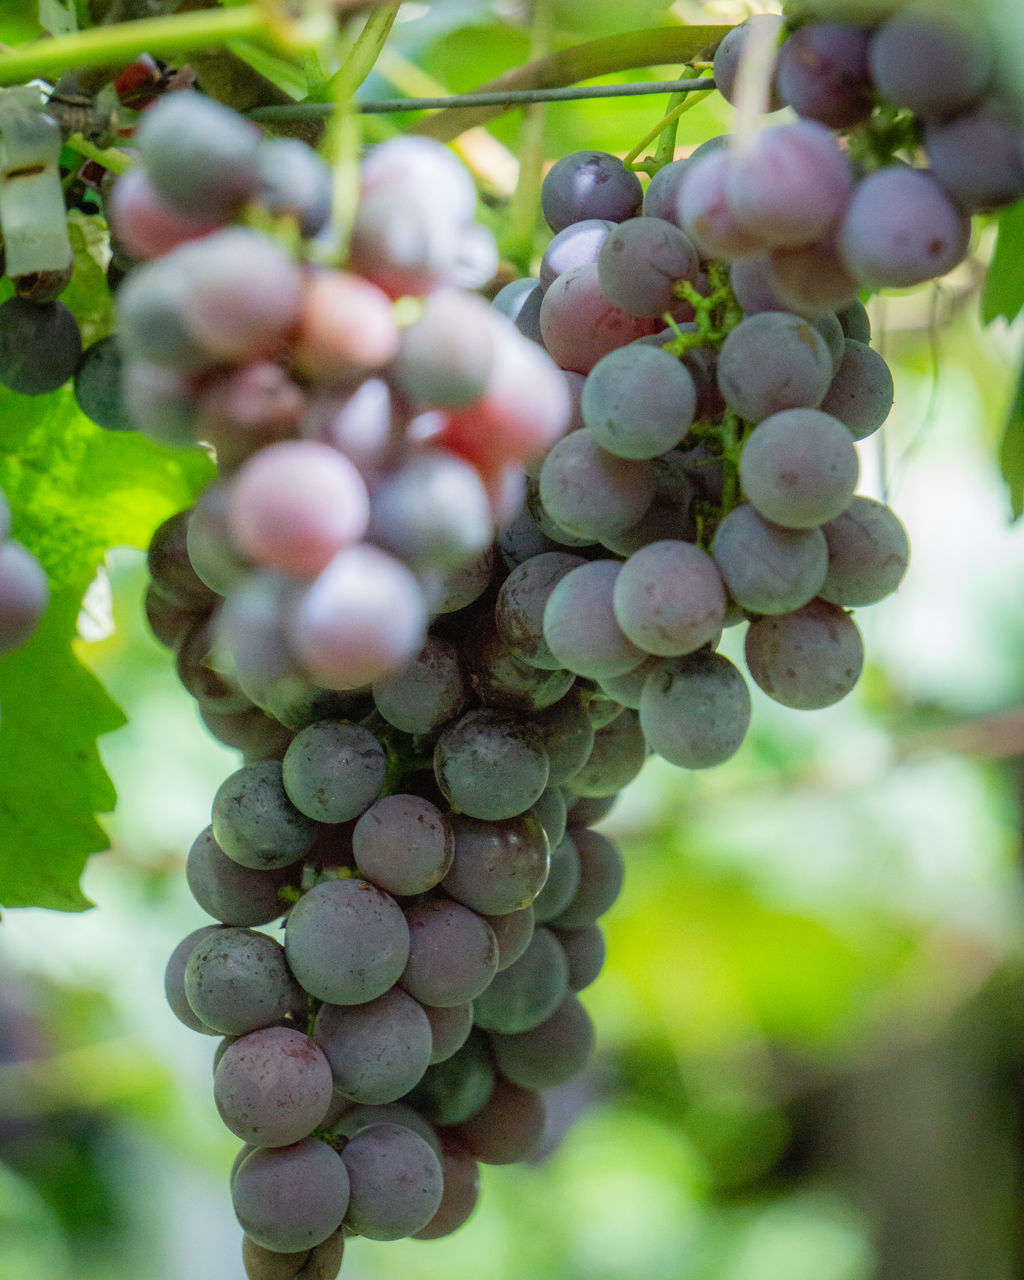 CLOSE-UP OF GRAPES IN VINEYARD